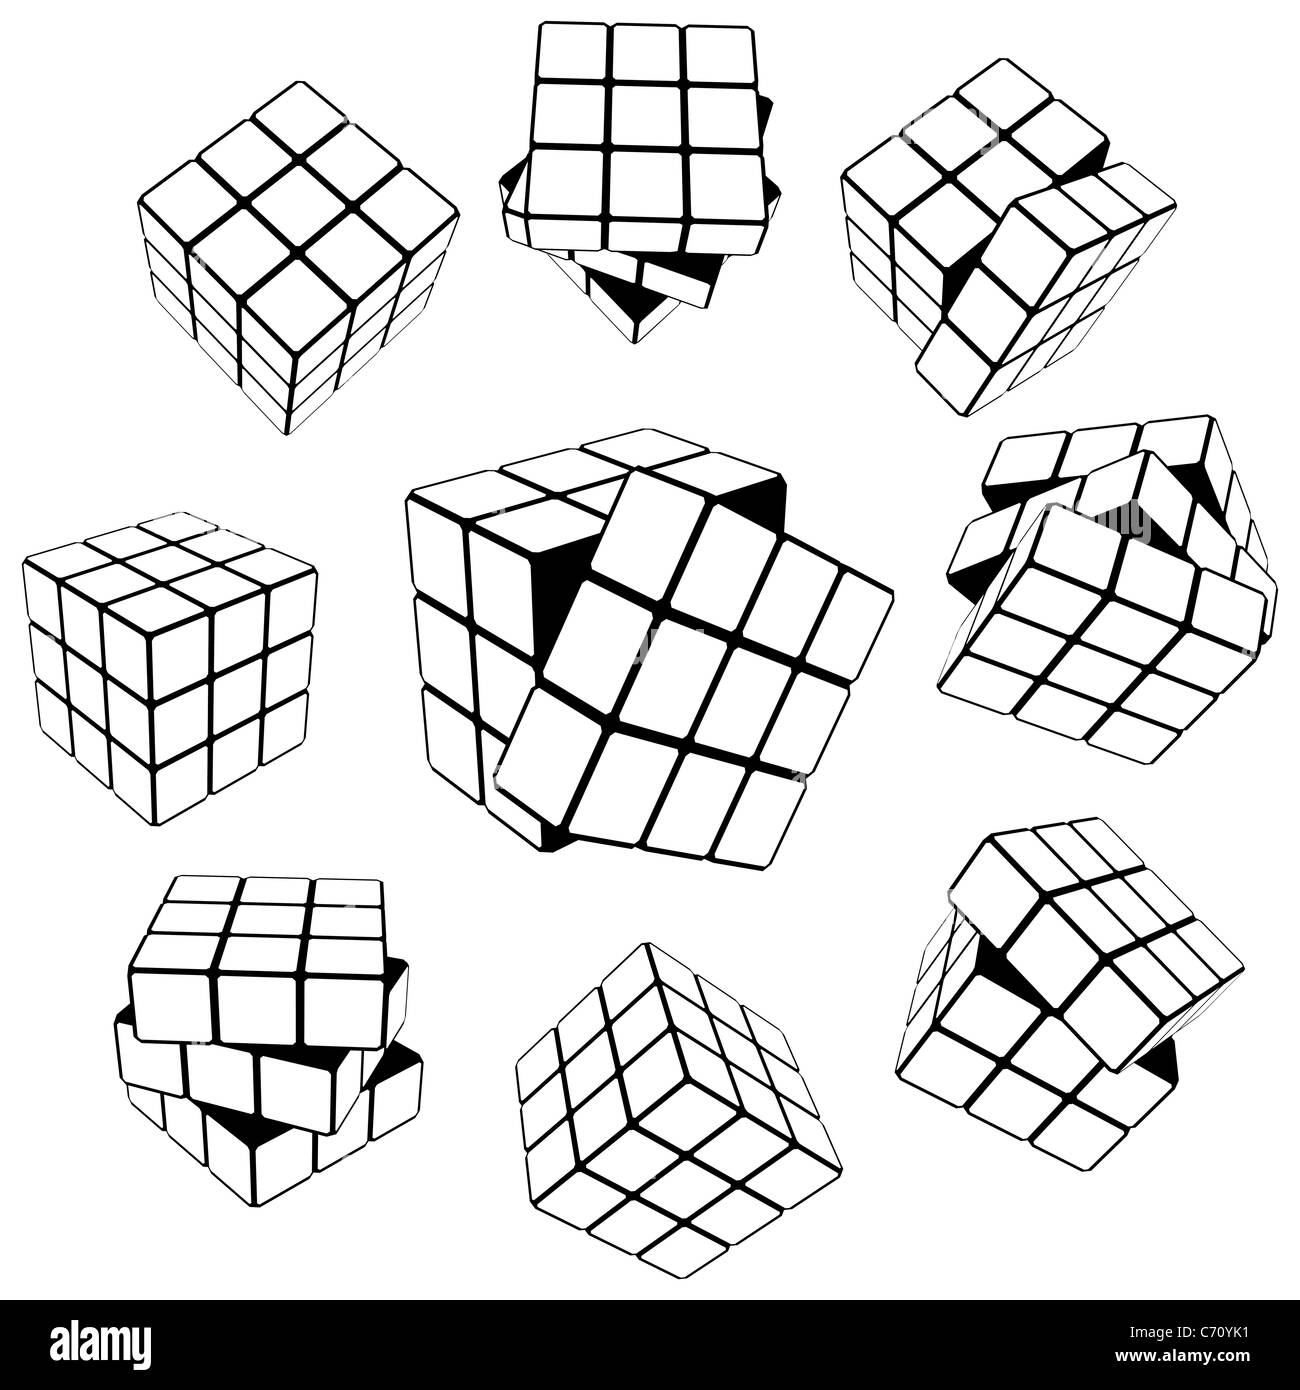 Cube puzzle Black and White Stock Photos & Images - Alamy